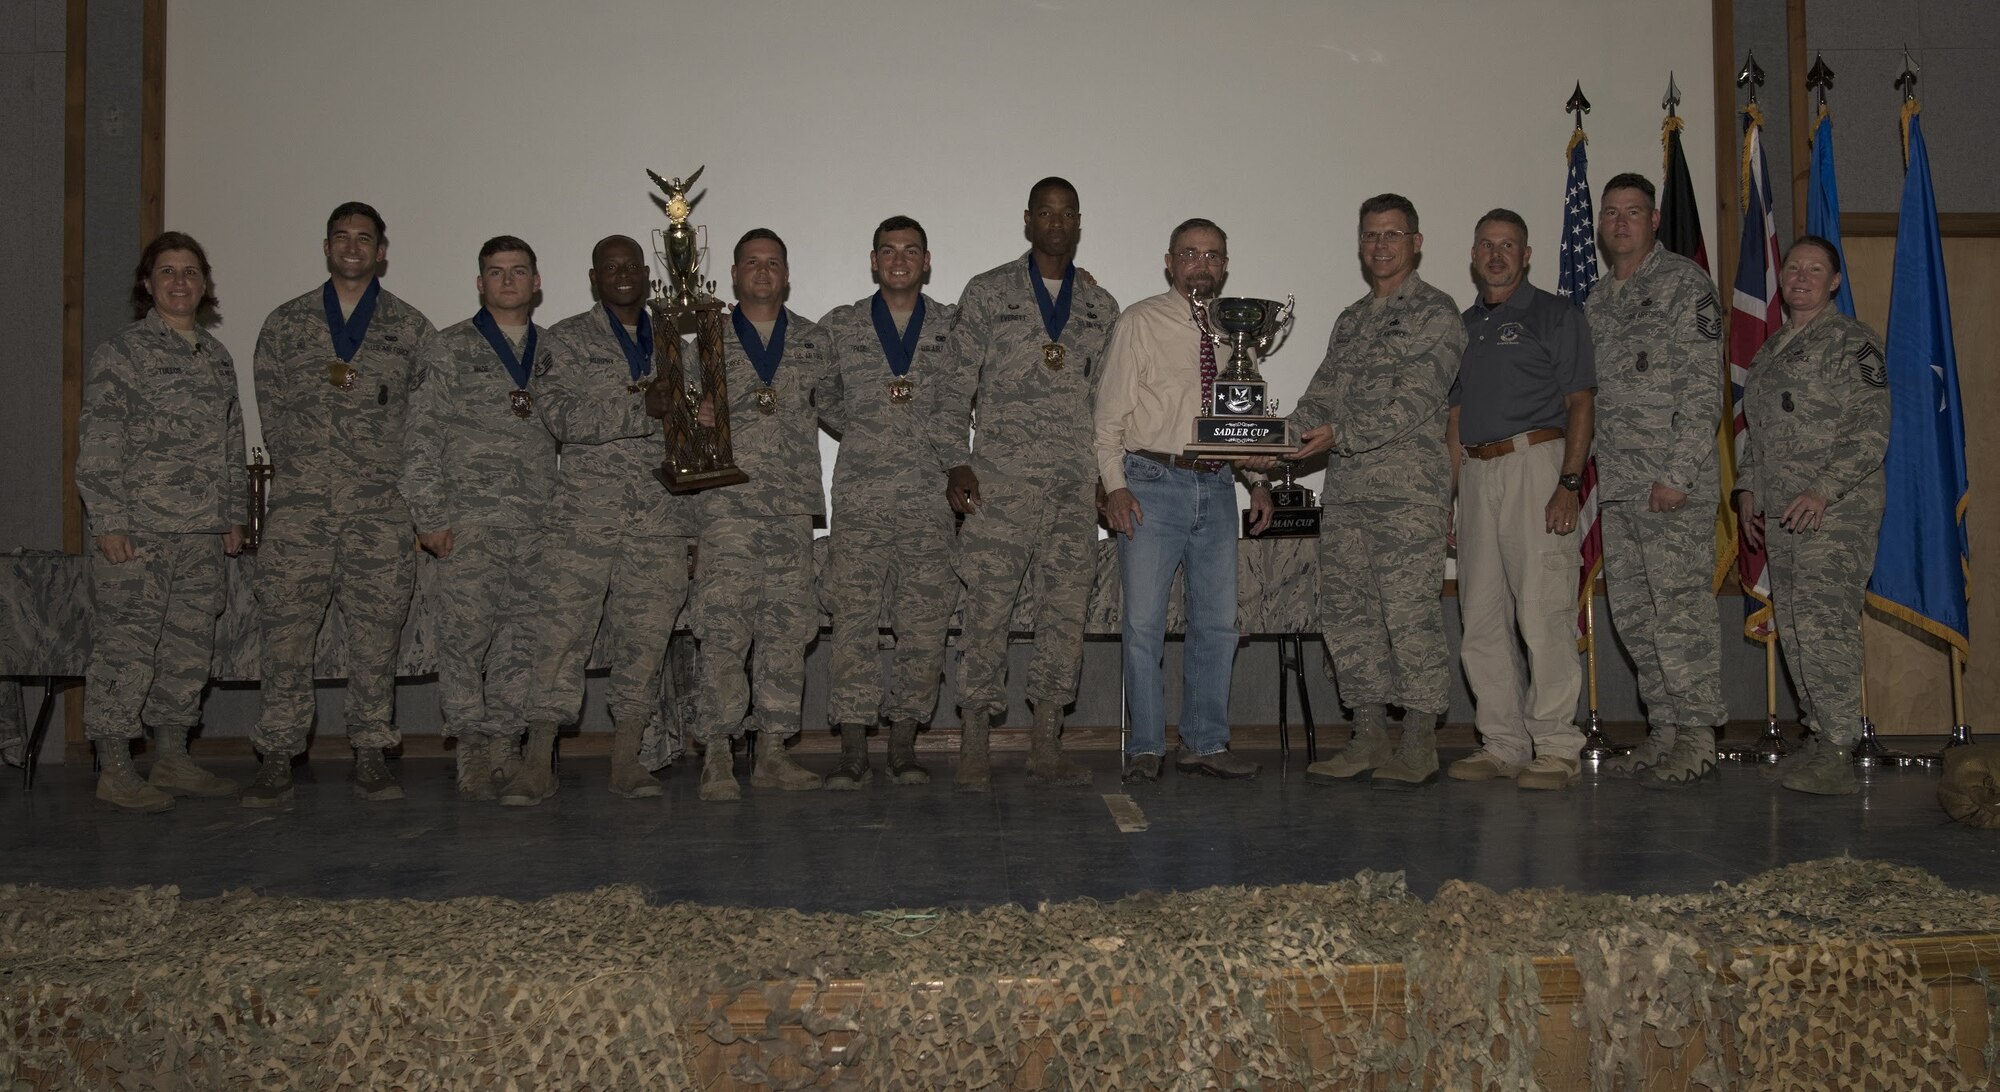 U.S. Air Force Brig. Gen. Andrea Tullos, security forces director, and Brig. Gen. Steven Bleymaier, AMC director of logistics, engineering and force protection, present the Sadler Cup to the AMC team during the 2018 Air Force Defender Challenge awards ceremony on Joint Base San Antonio-Camp Bullis, Texas, Sept. 13, 2018. The Sadler Cup was awarded to AMC for winning the dismounted operations challenge of the three-day competition. (U.S. Air Force photo by Airman Ariel Owings)